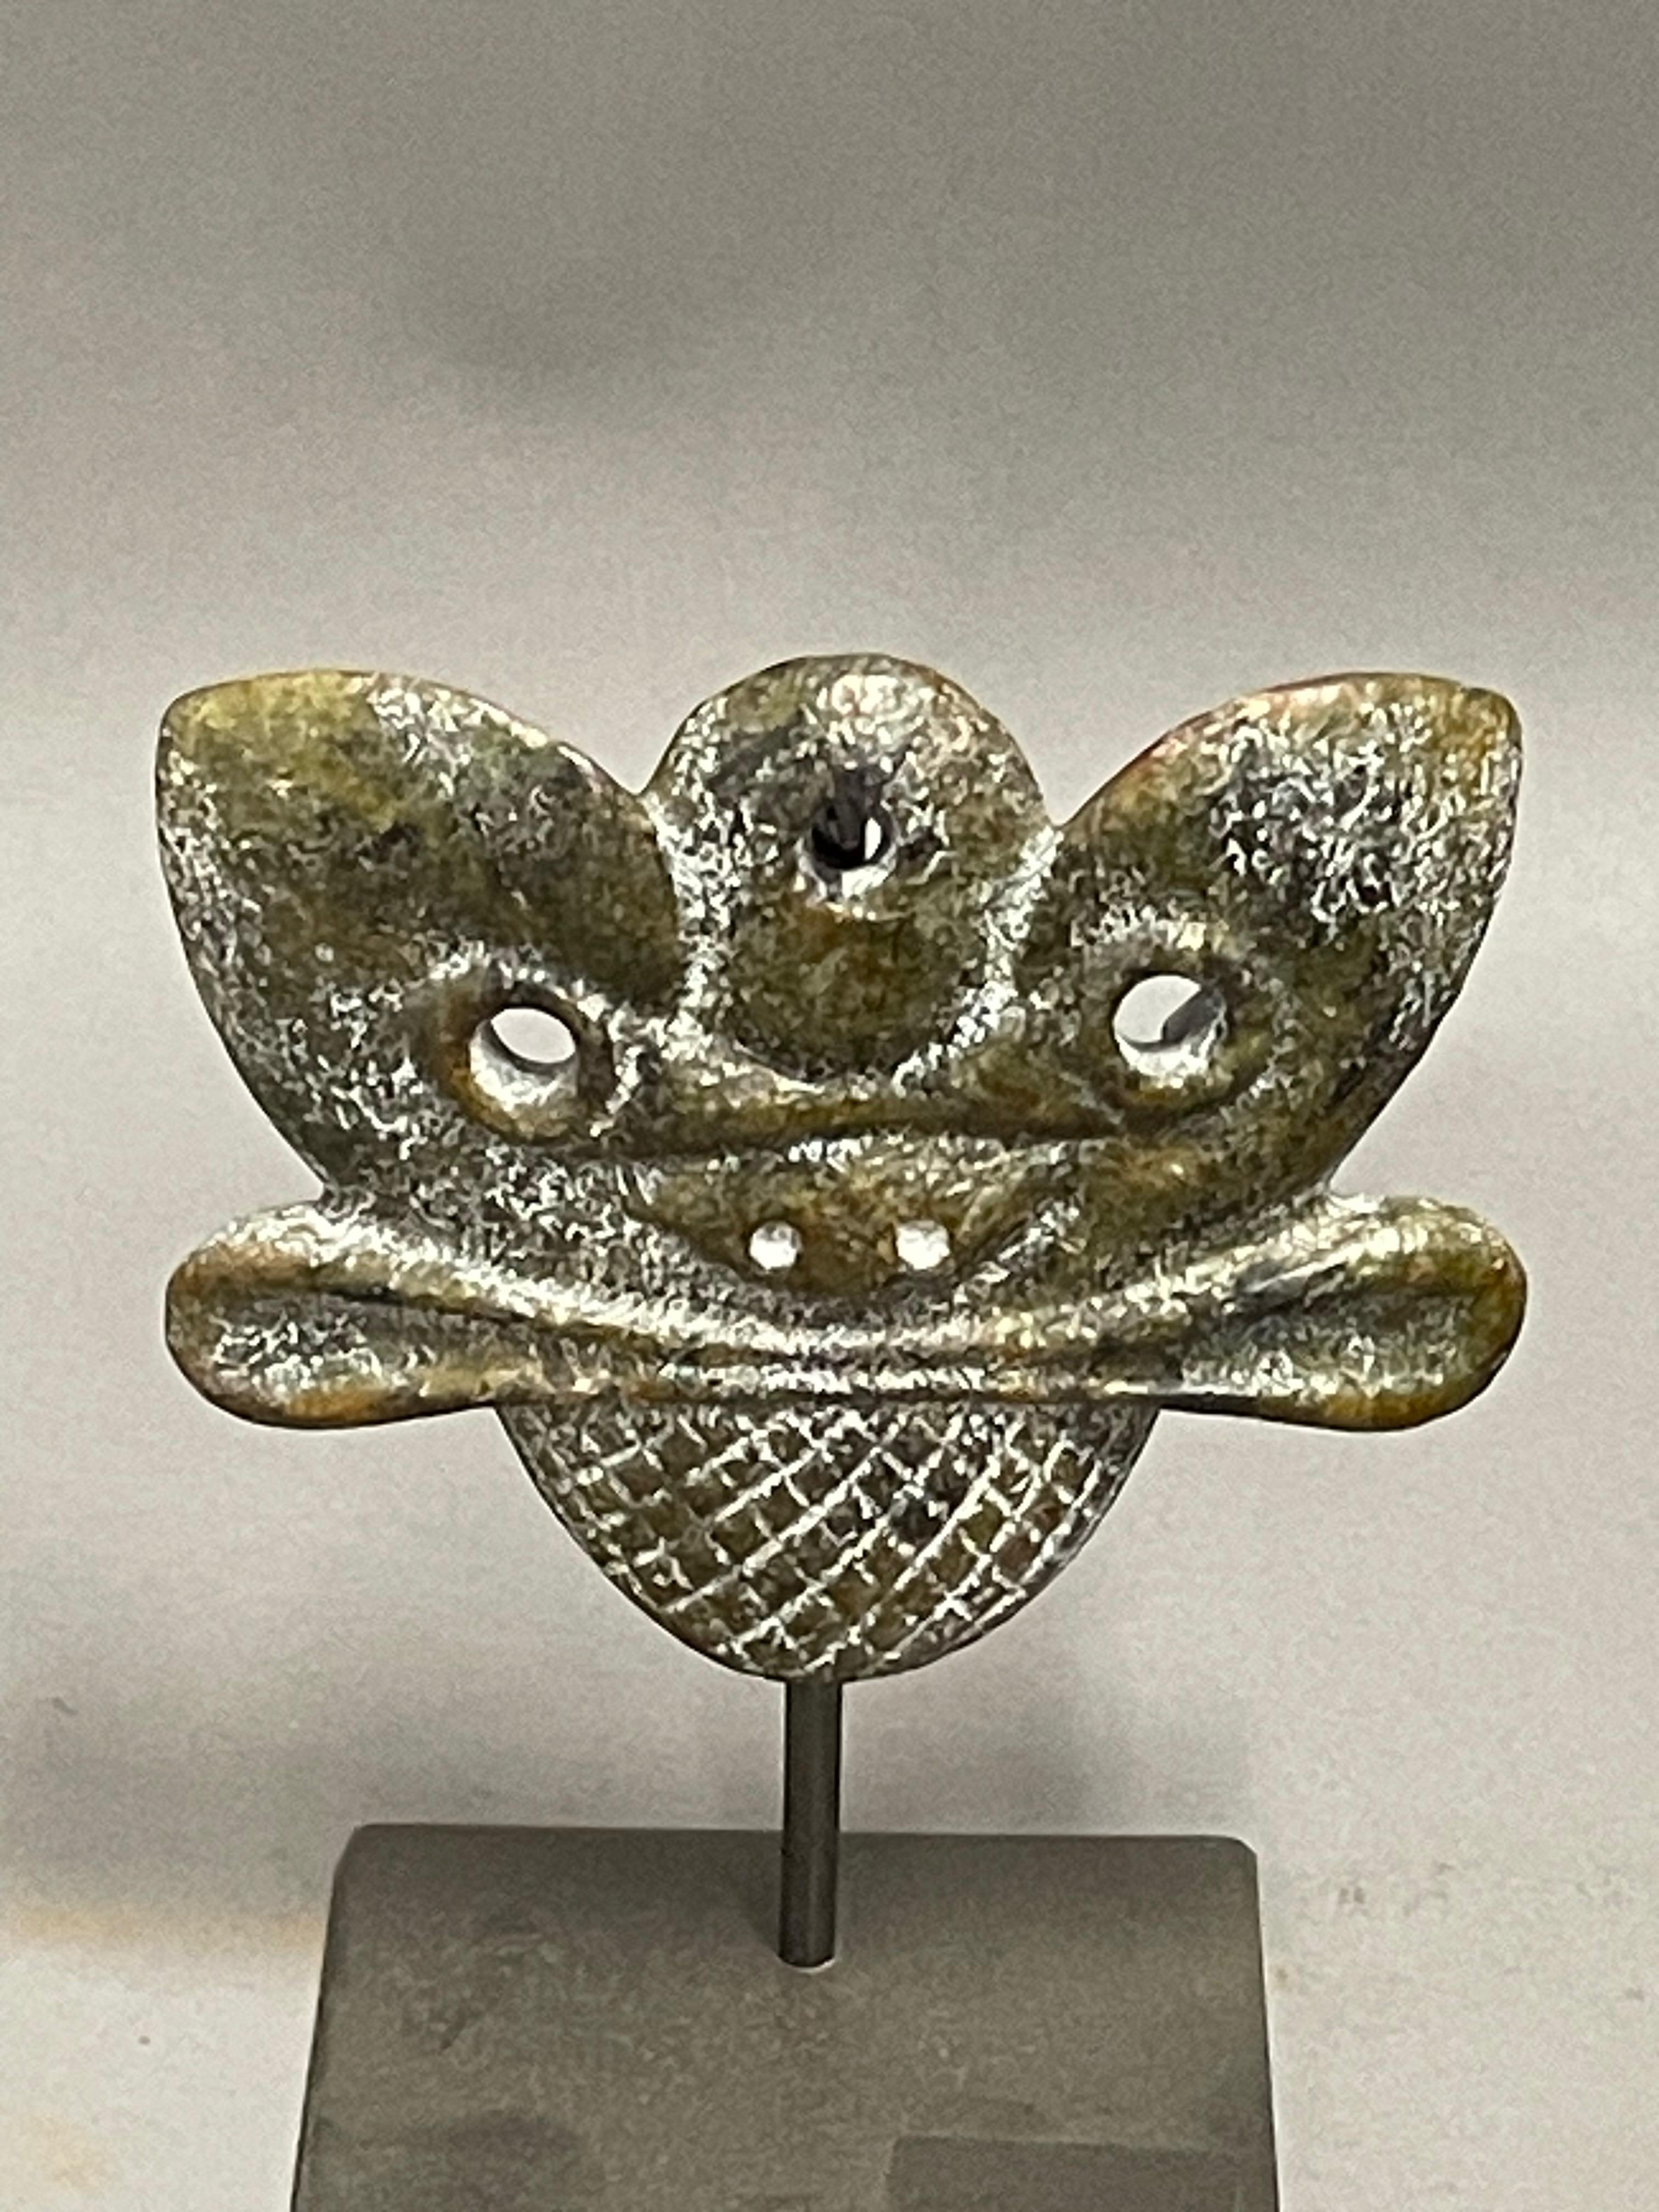 Contemporary Chinese hand carved stone mask on metal stand.
Stand measures   4